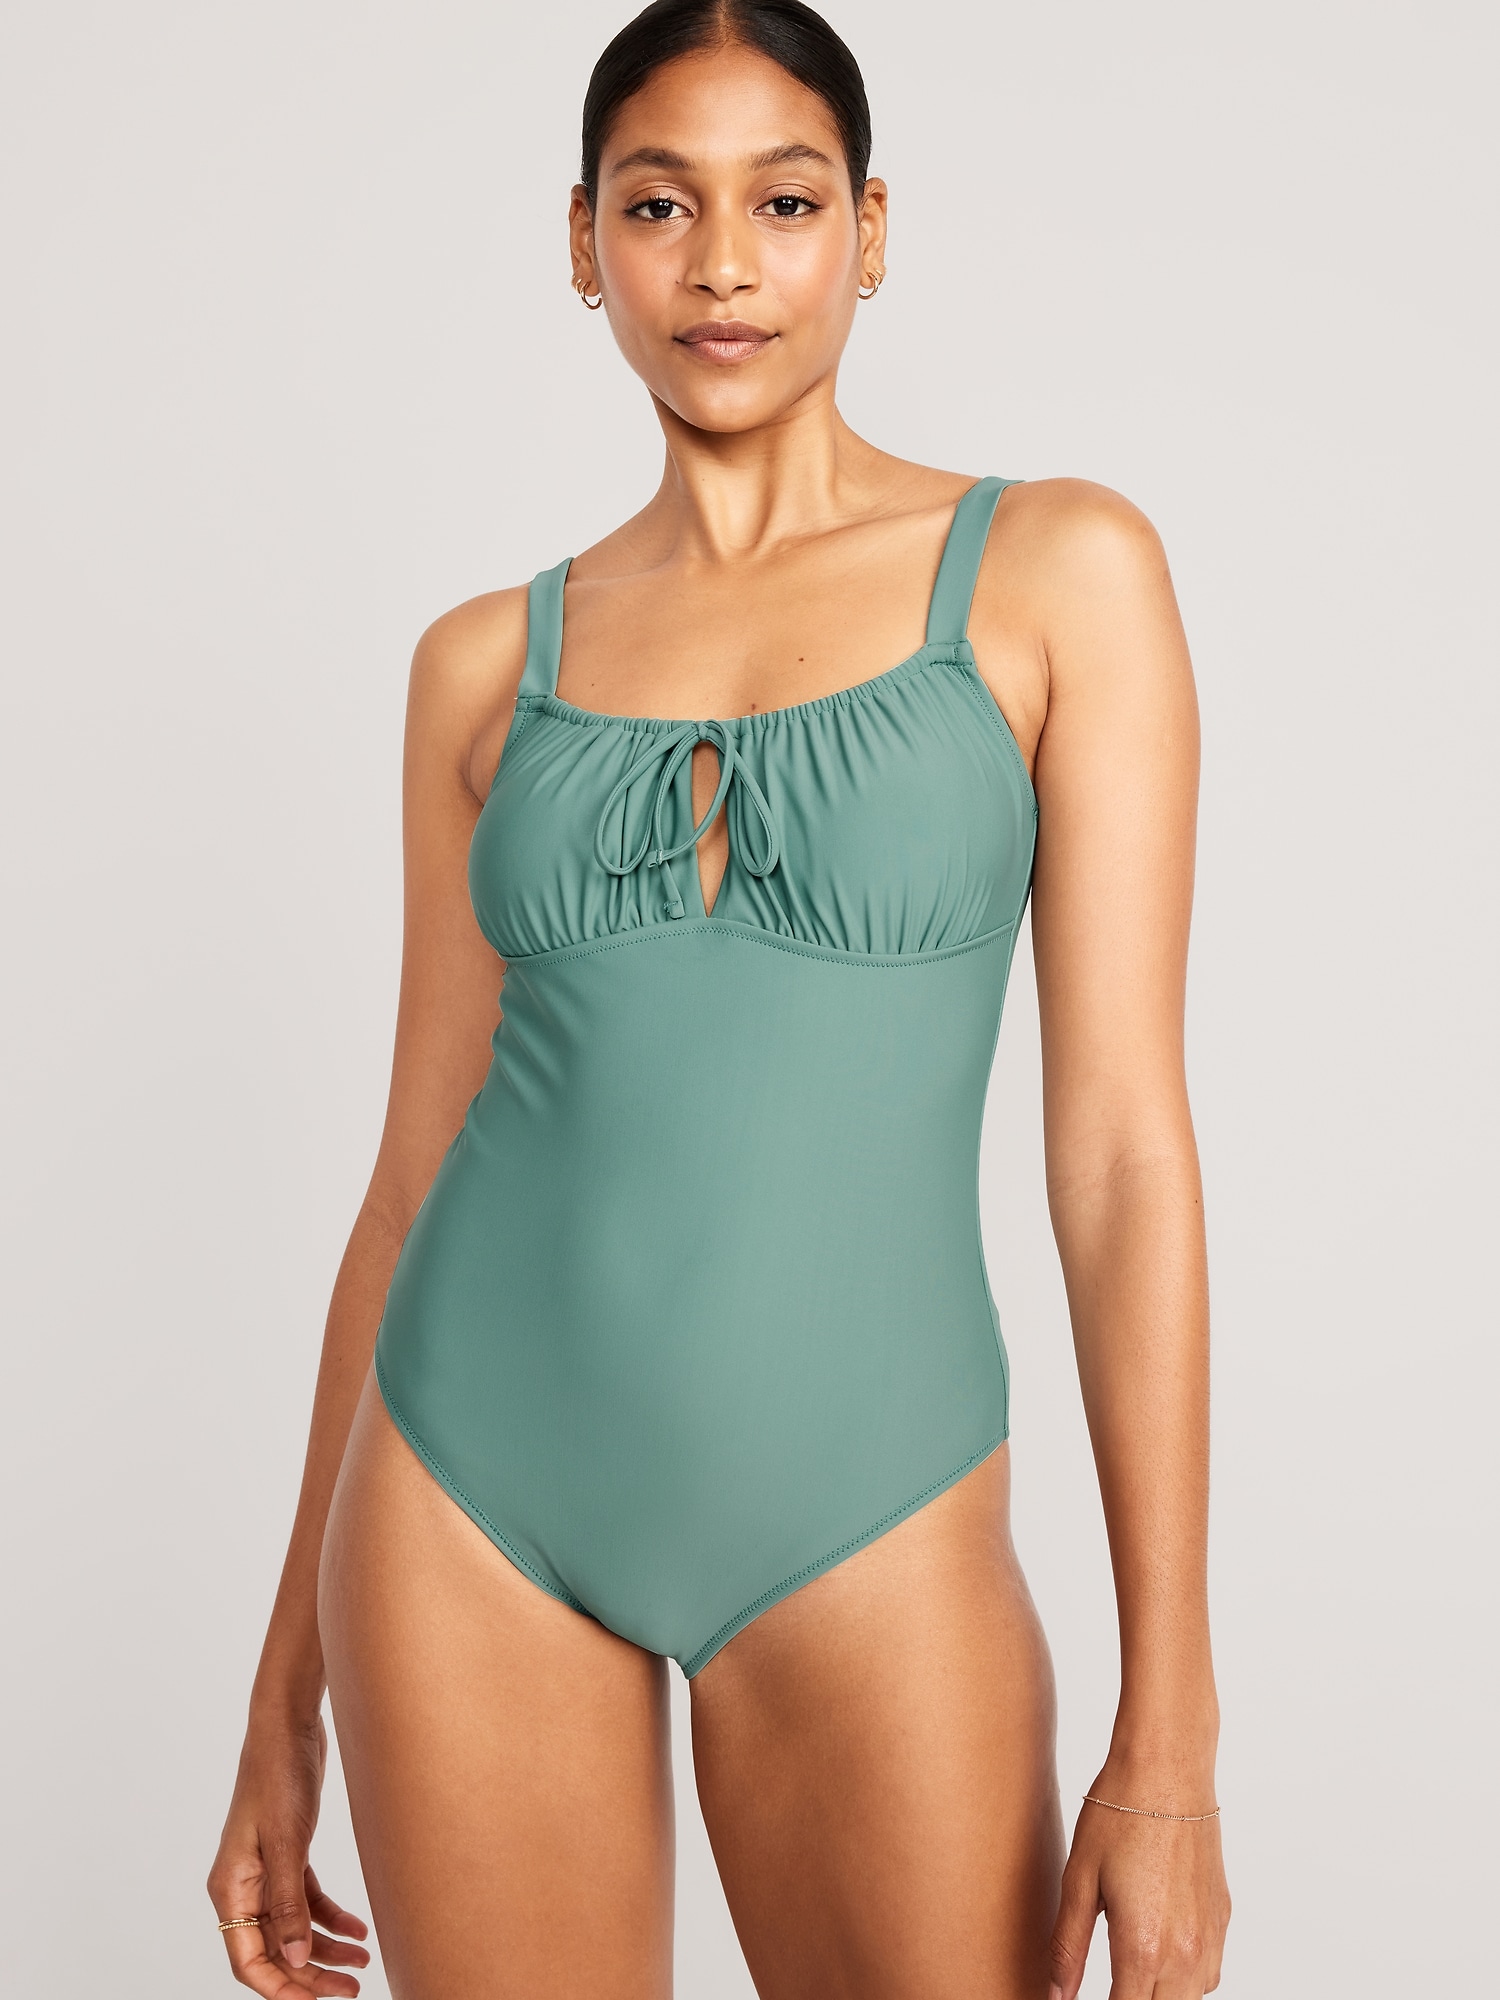 Oldnavy Cinched-Tie One-Piece Swimsuit for Women